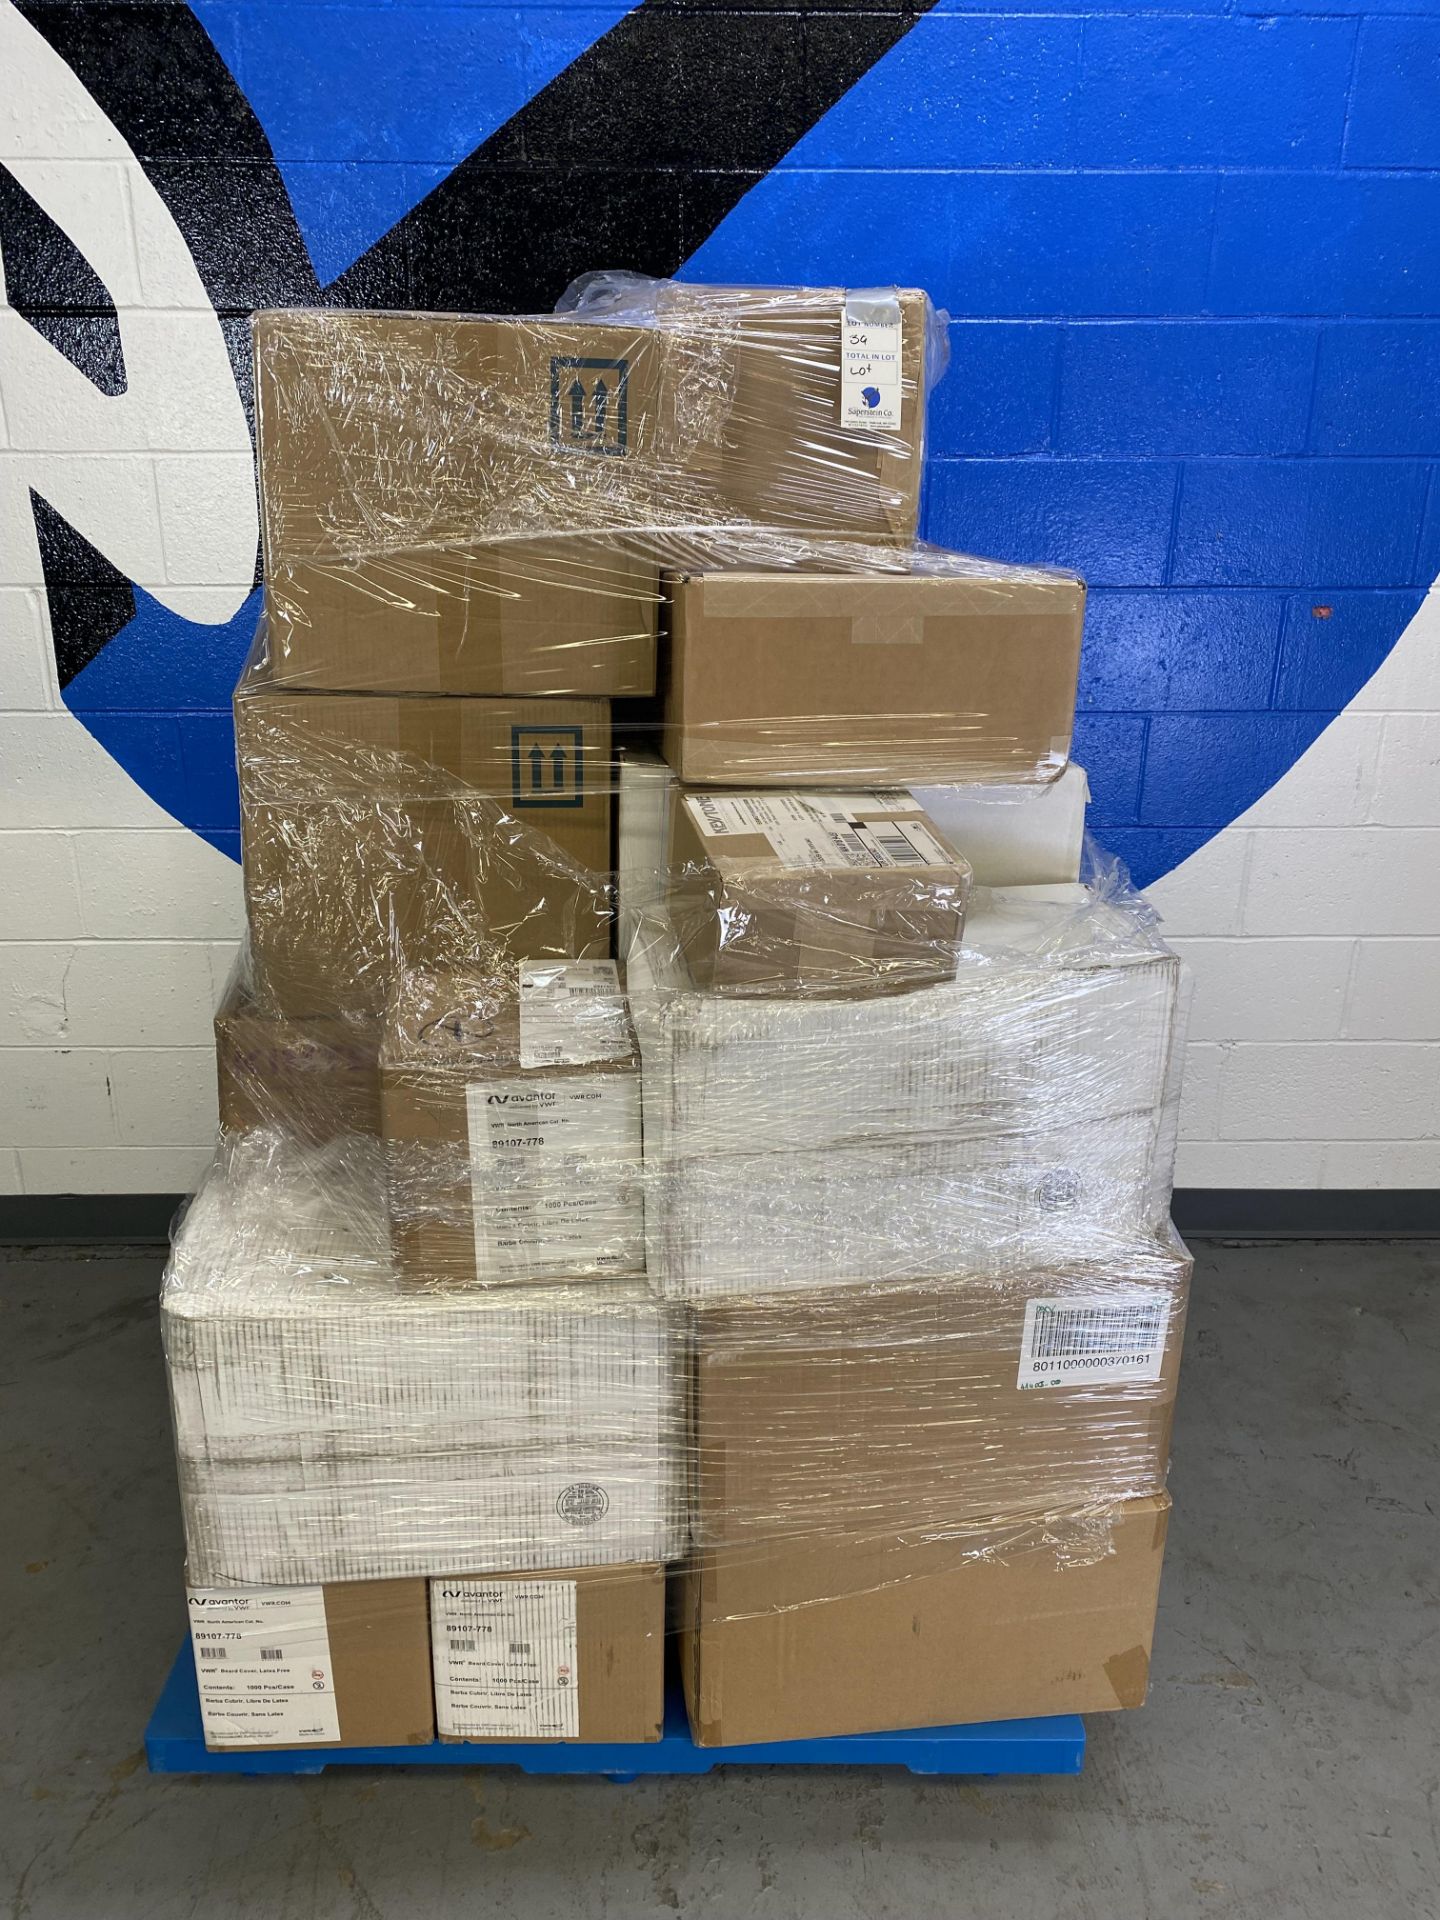 {LOT} Of Consumables on Pallet of Approx. 30 Boxes c/o: Key Stone Self Sealing Sterilization Pouches